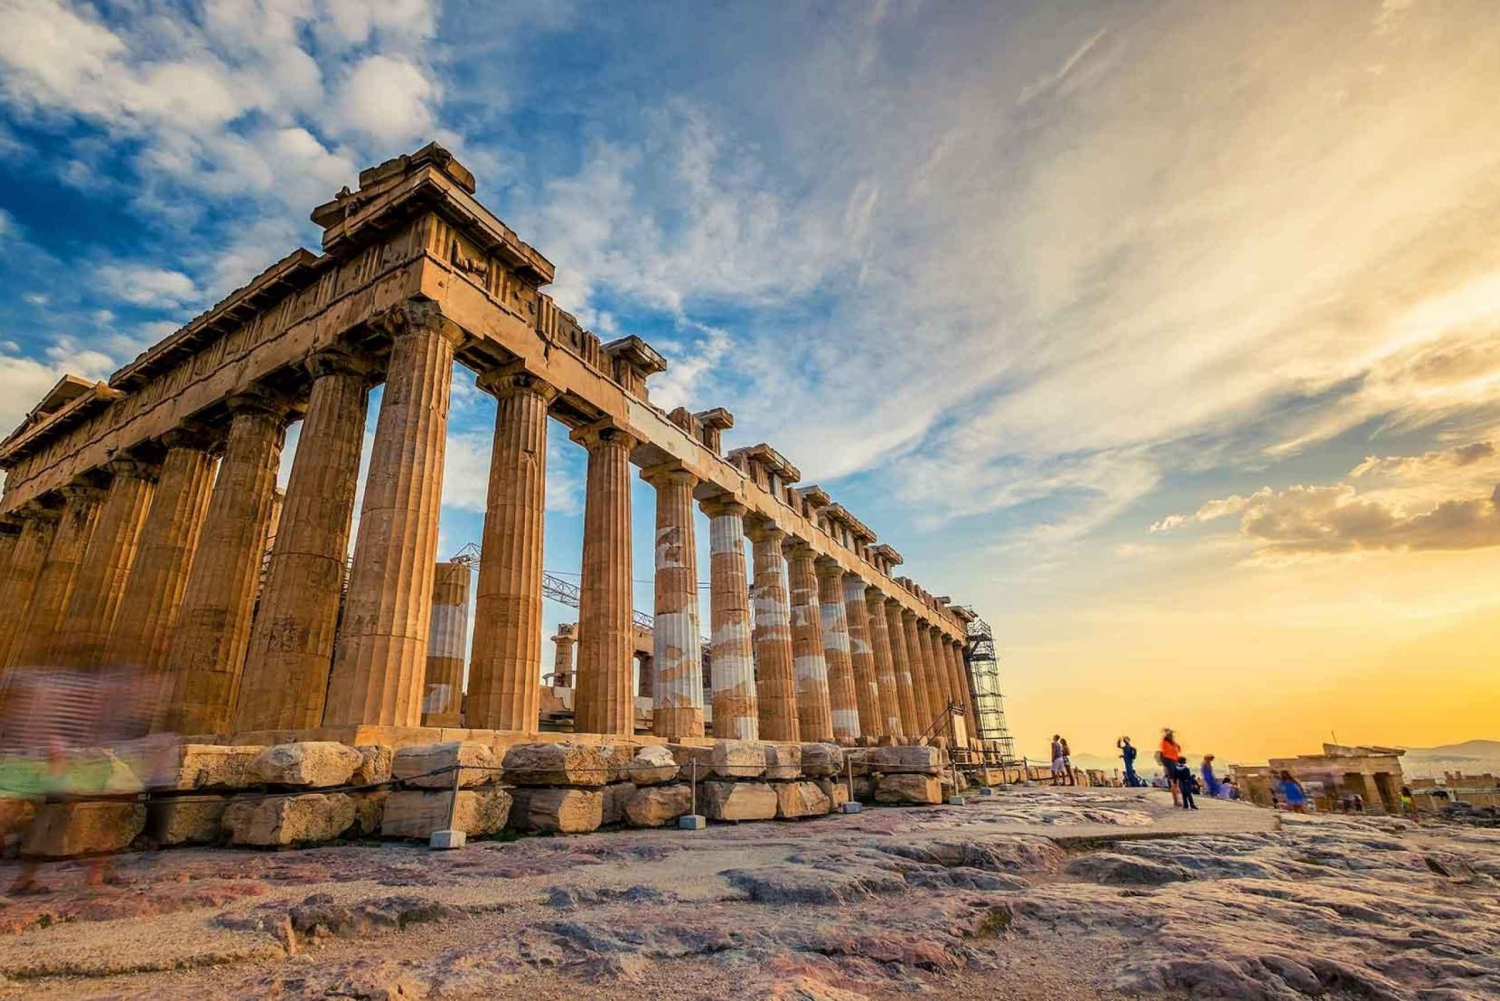 Embark-Disembark The Highlights Of Athens 4hrs Private Tour